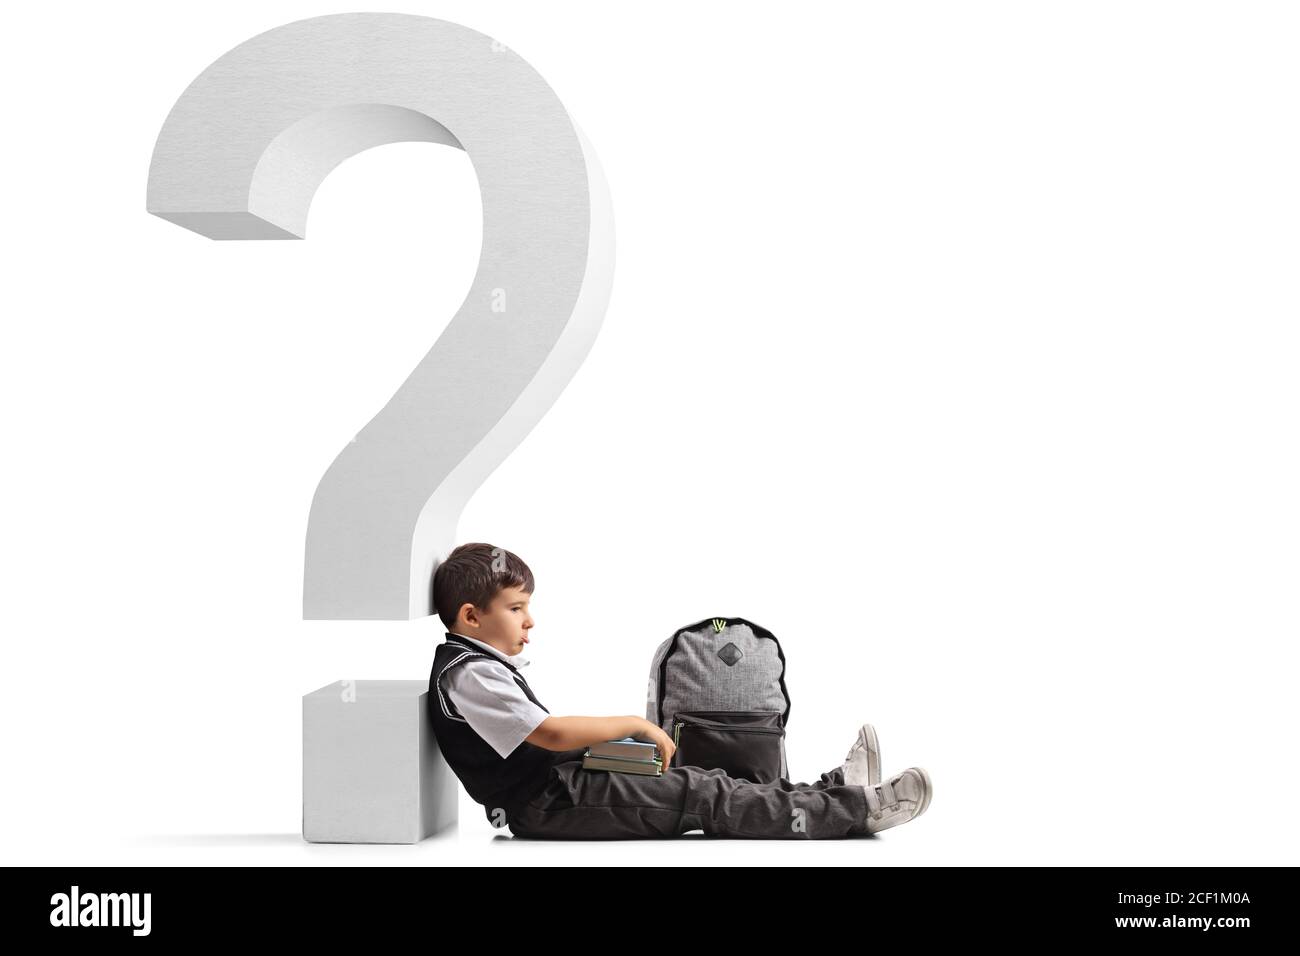 Sad schoolboy with a backpack and books seated on the floor and leaning on a question mark isolated on white background Stock Photo